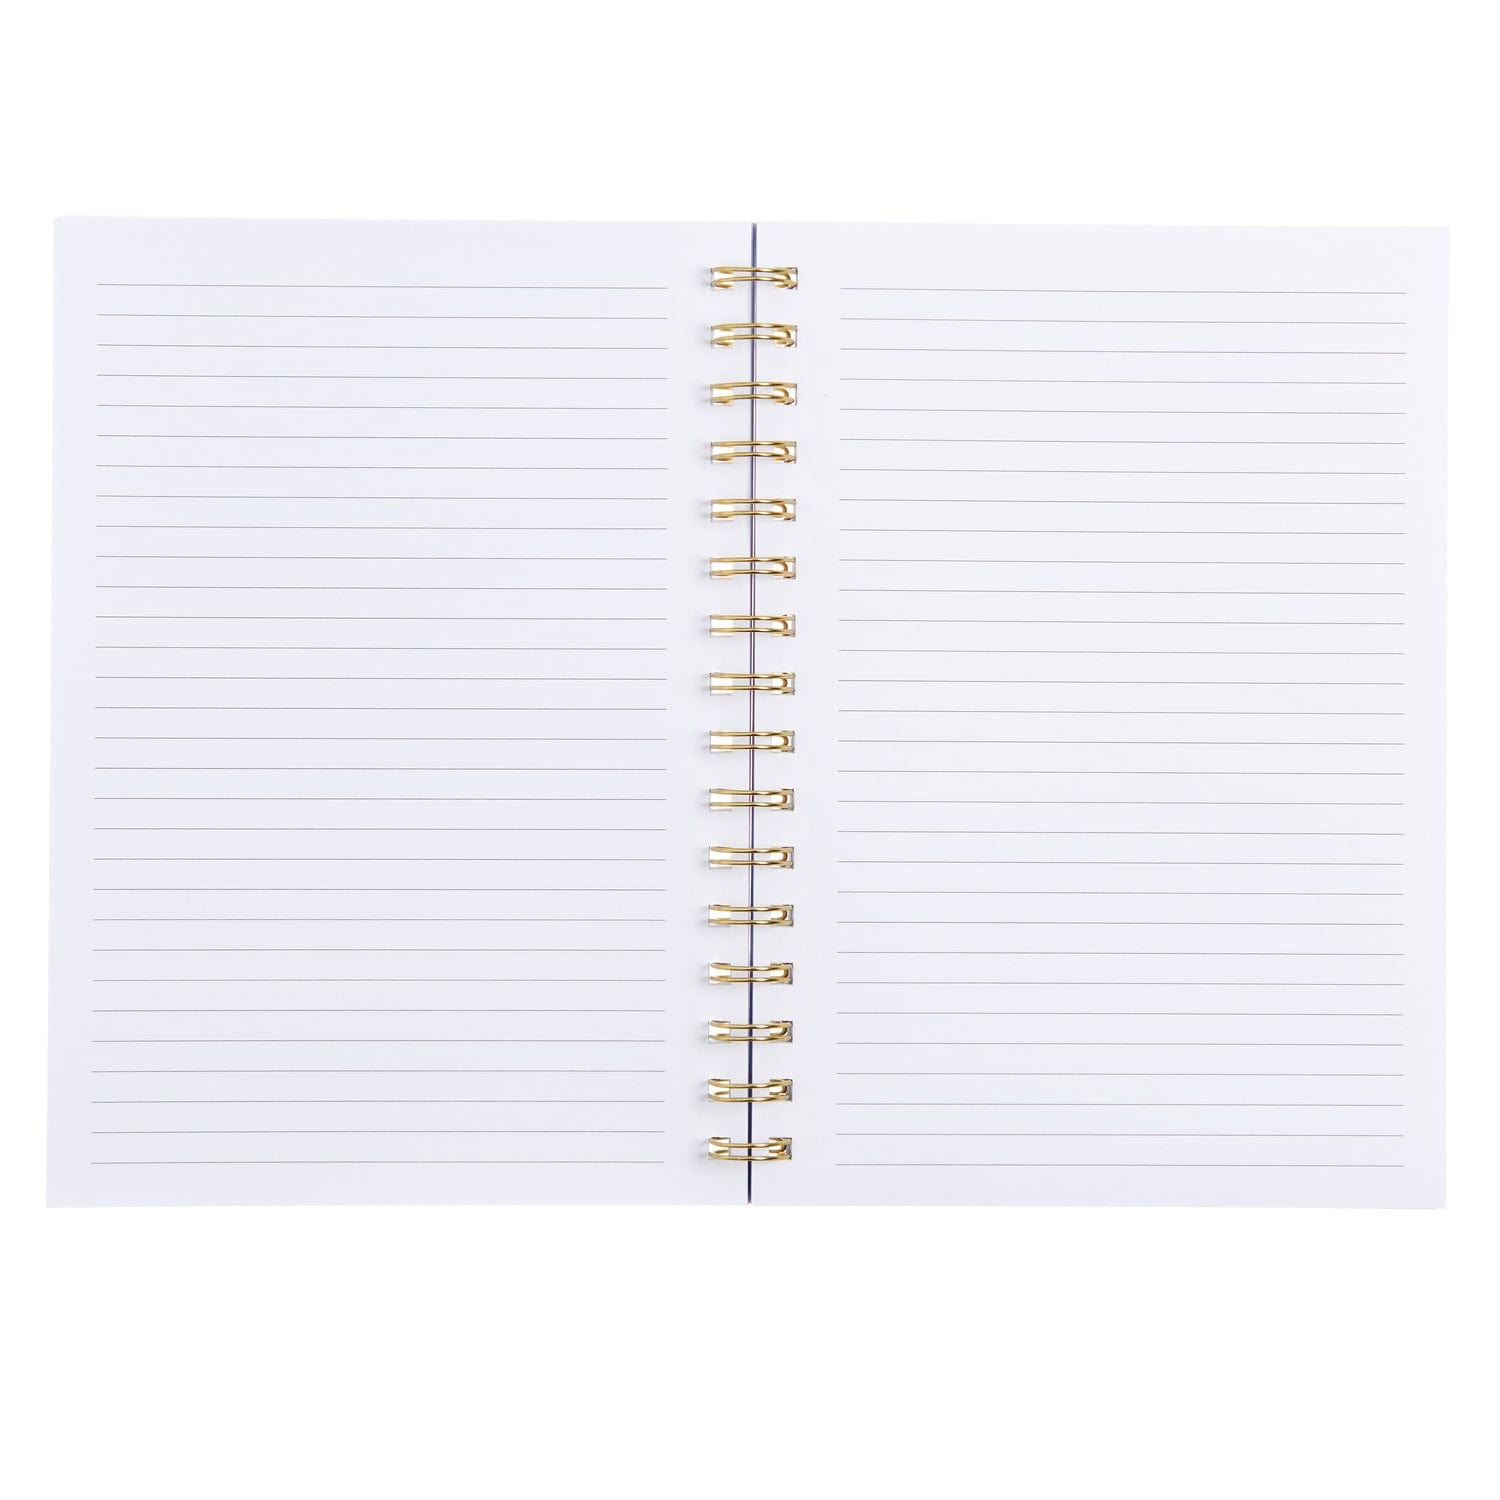 Notebook For Stucco Masons: 120 Page Blank Lined Journal, Perfect Notebook  For Jotting Down Notes - Stucco Mason Gifts For Girls 10-12 Years Old Under  10: Readers, Empowering: 9798727872628: : Books